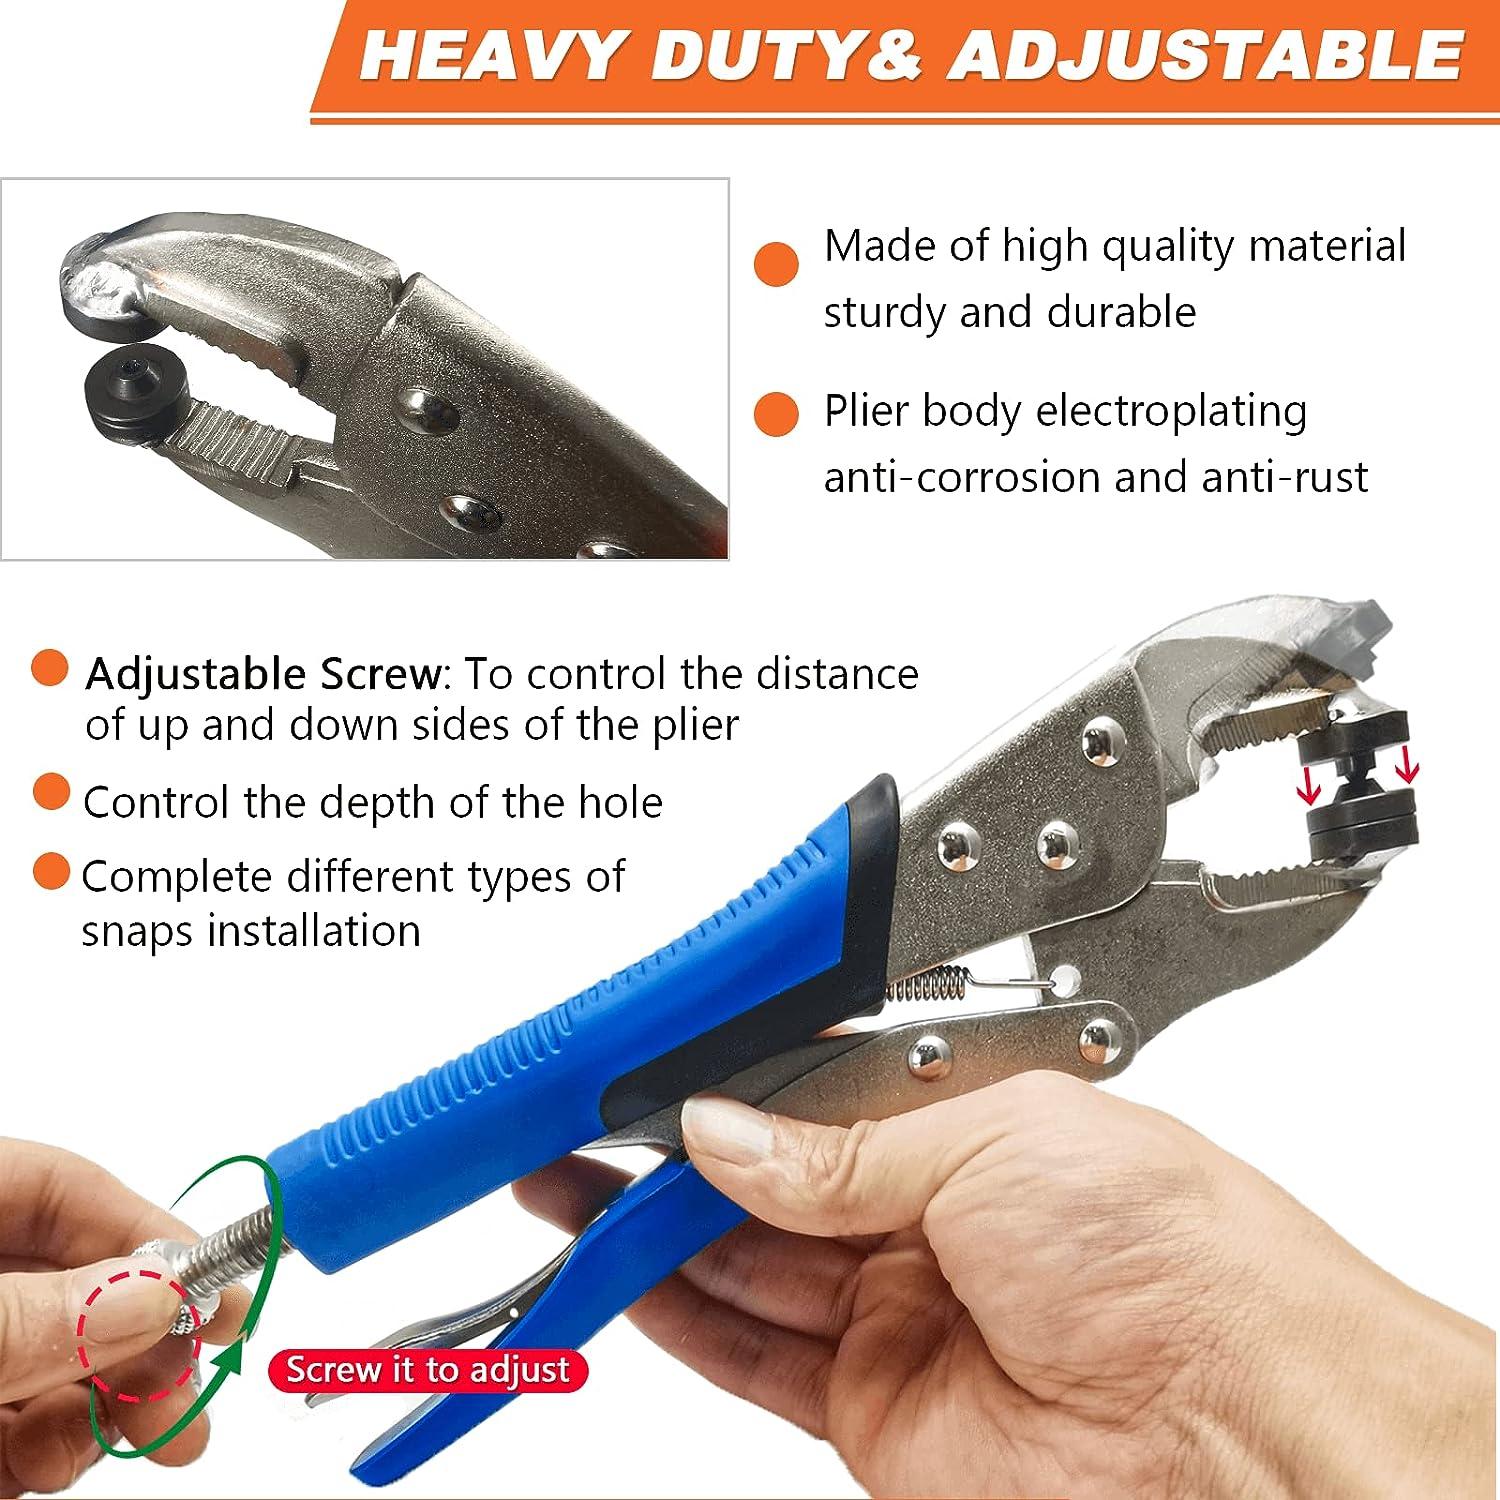 Snap Fastener Tool,Snap Tool for Boat Covers, Heavy Duty Snap Setter Pliers  Canv